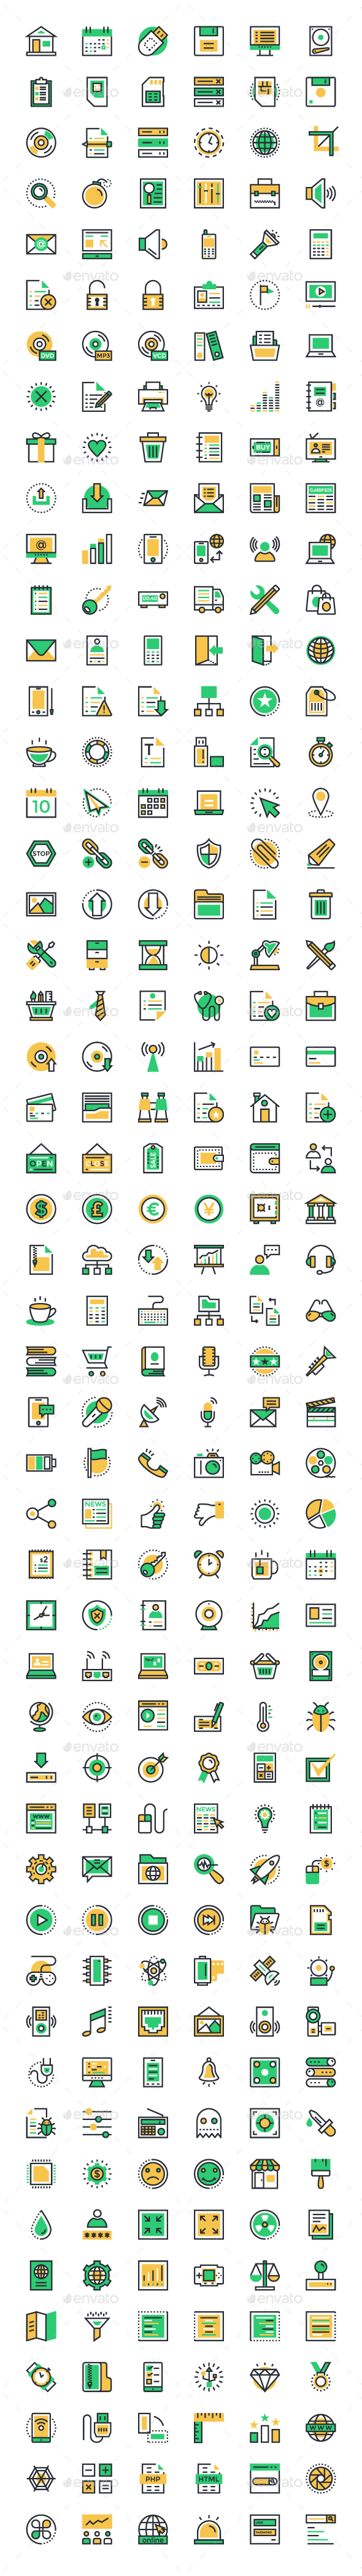 300 User Interface and Web Icons